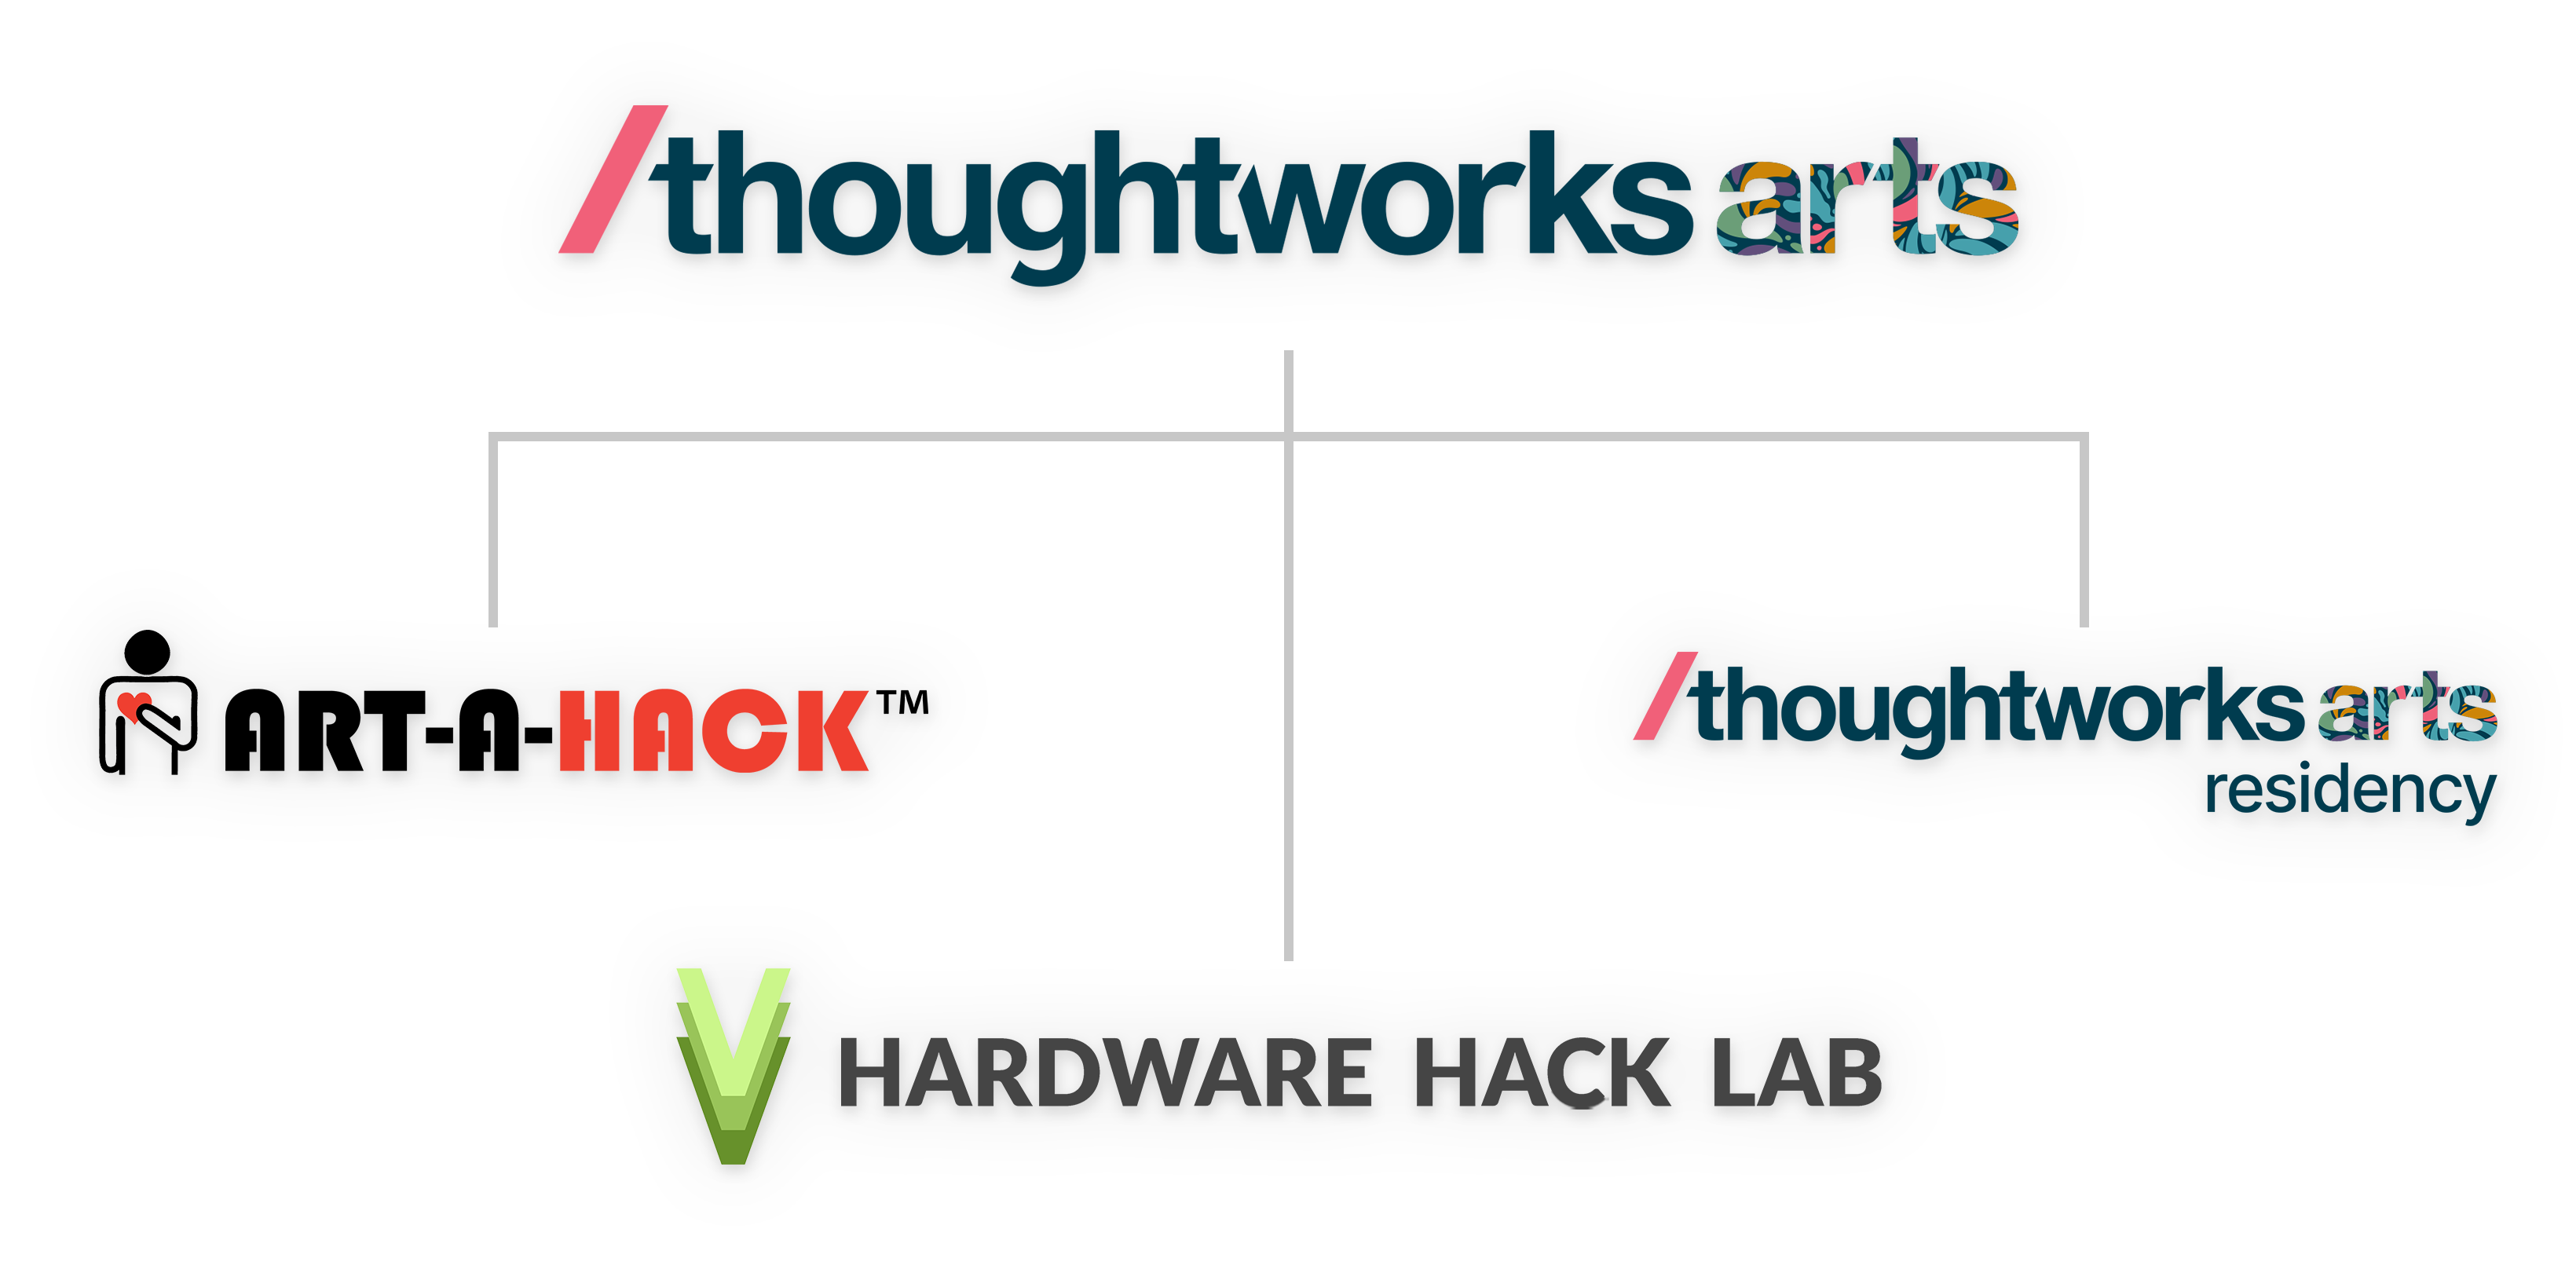 Thoughtworks Arts includes programs such as Art-A-Hack, Hardware Hack Lab and the Thoughtworks Arts Residency